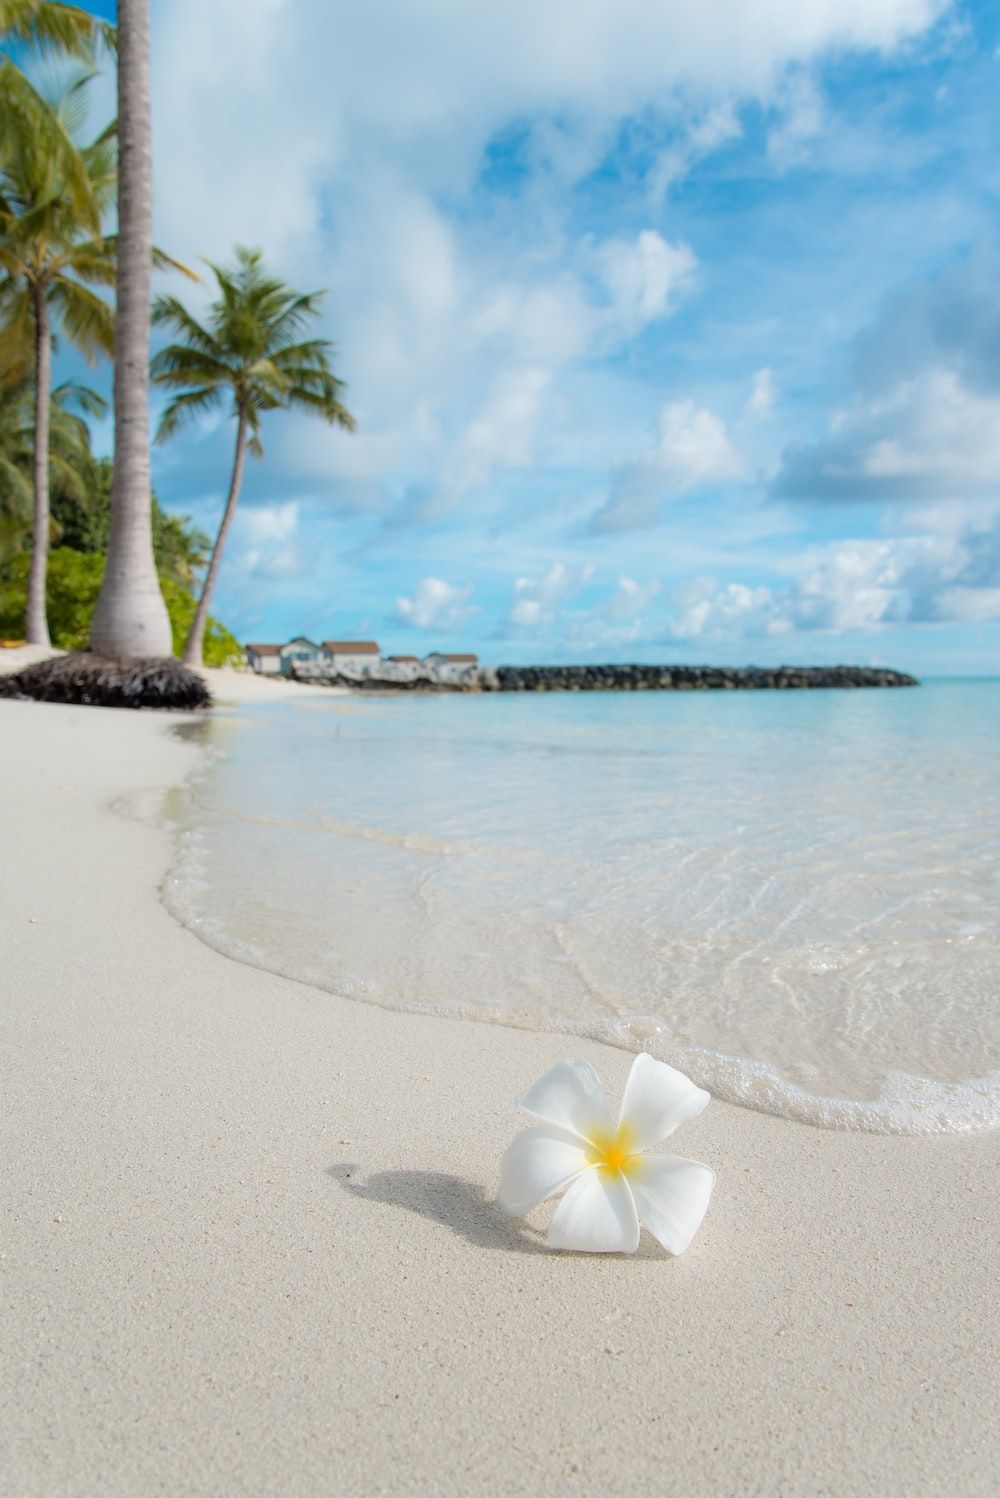 A white flower on the beach with palm trees - Tropical